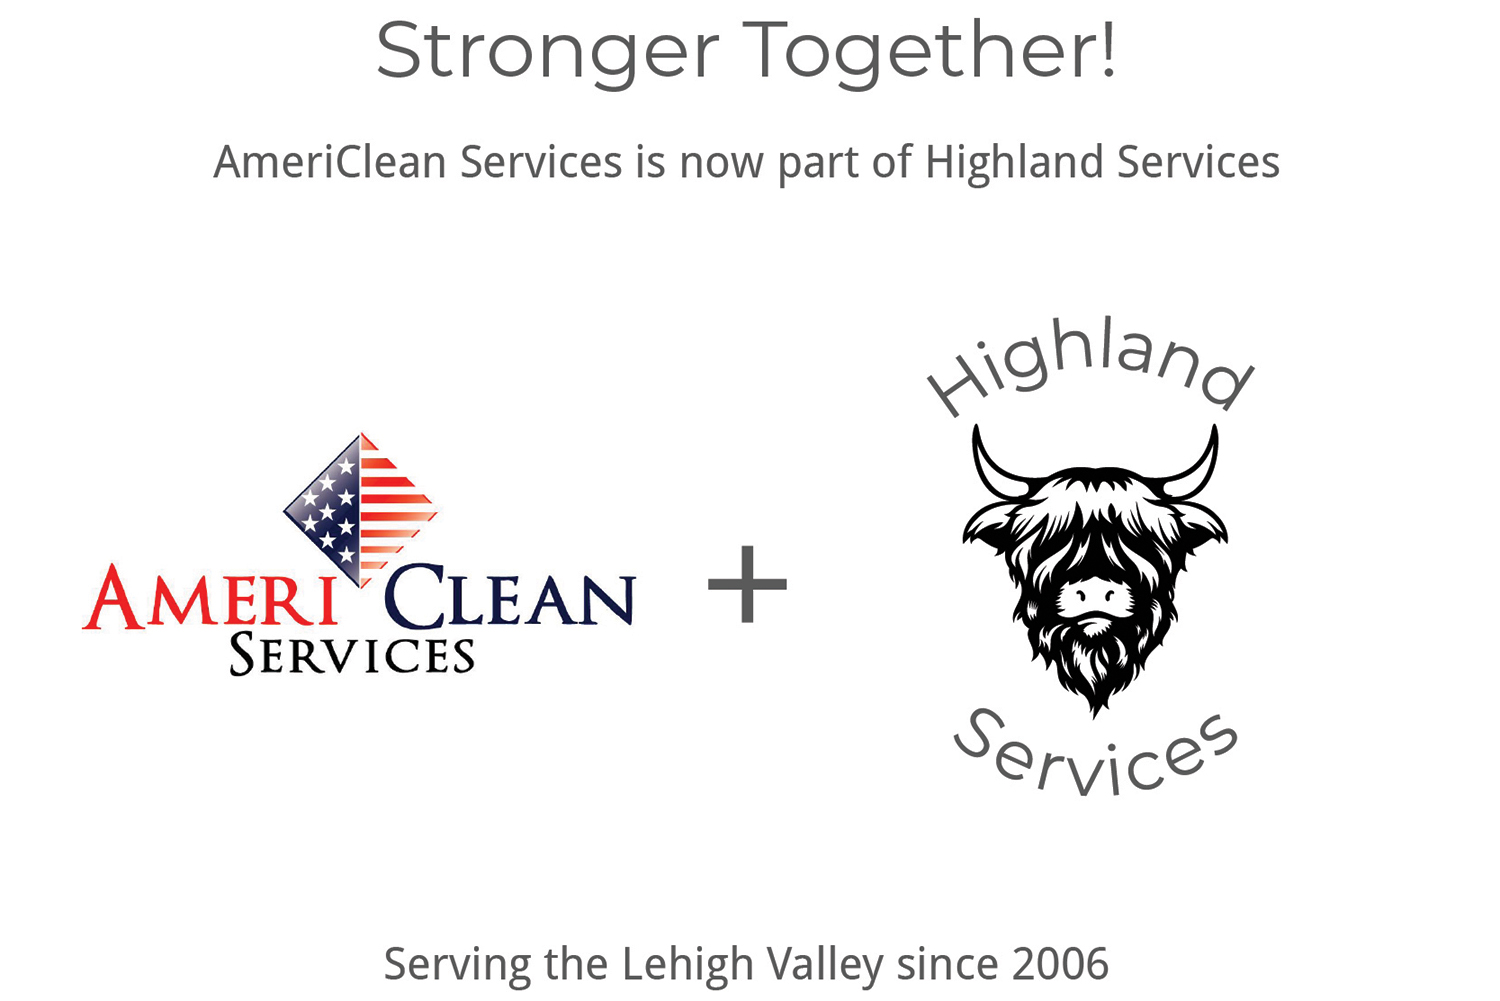 AmeriClean Services is now part of Highland Services